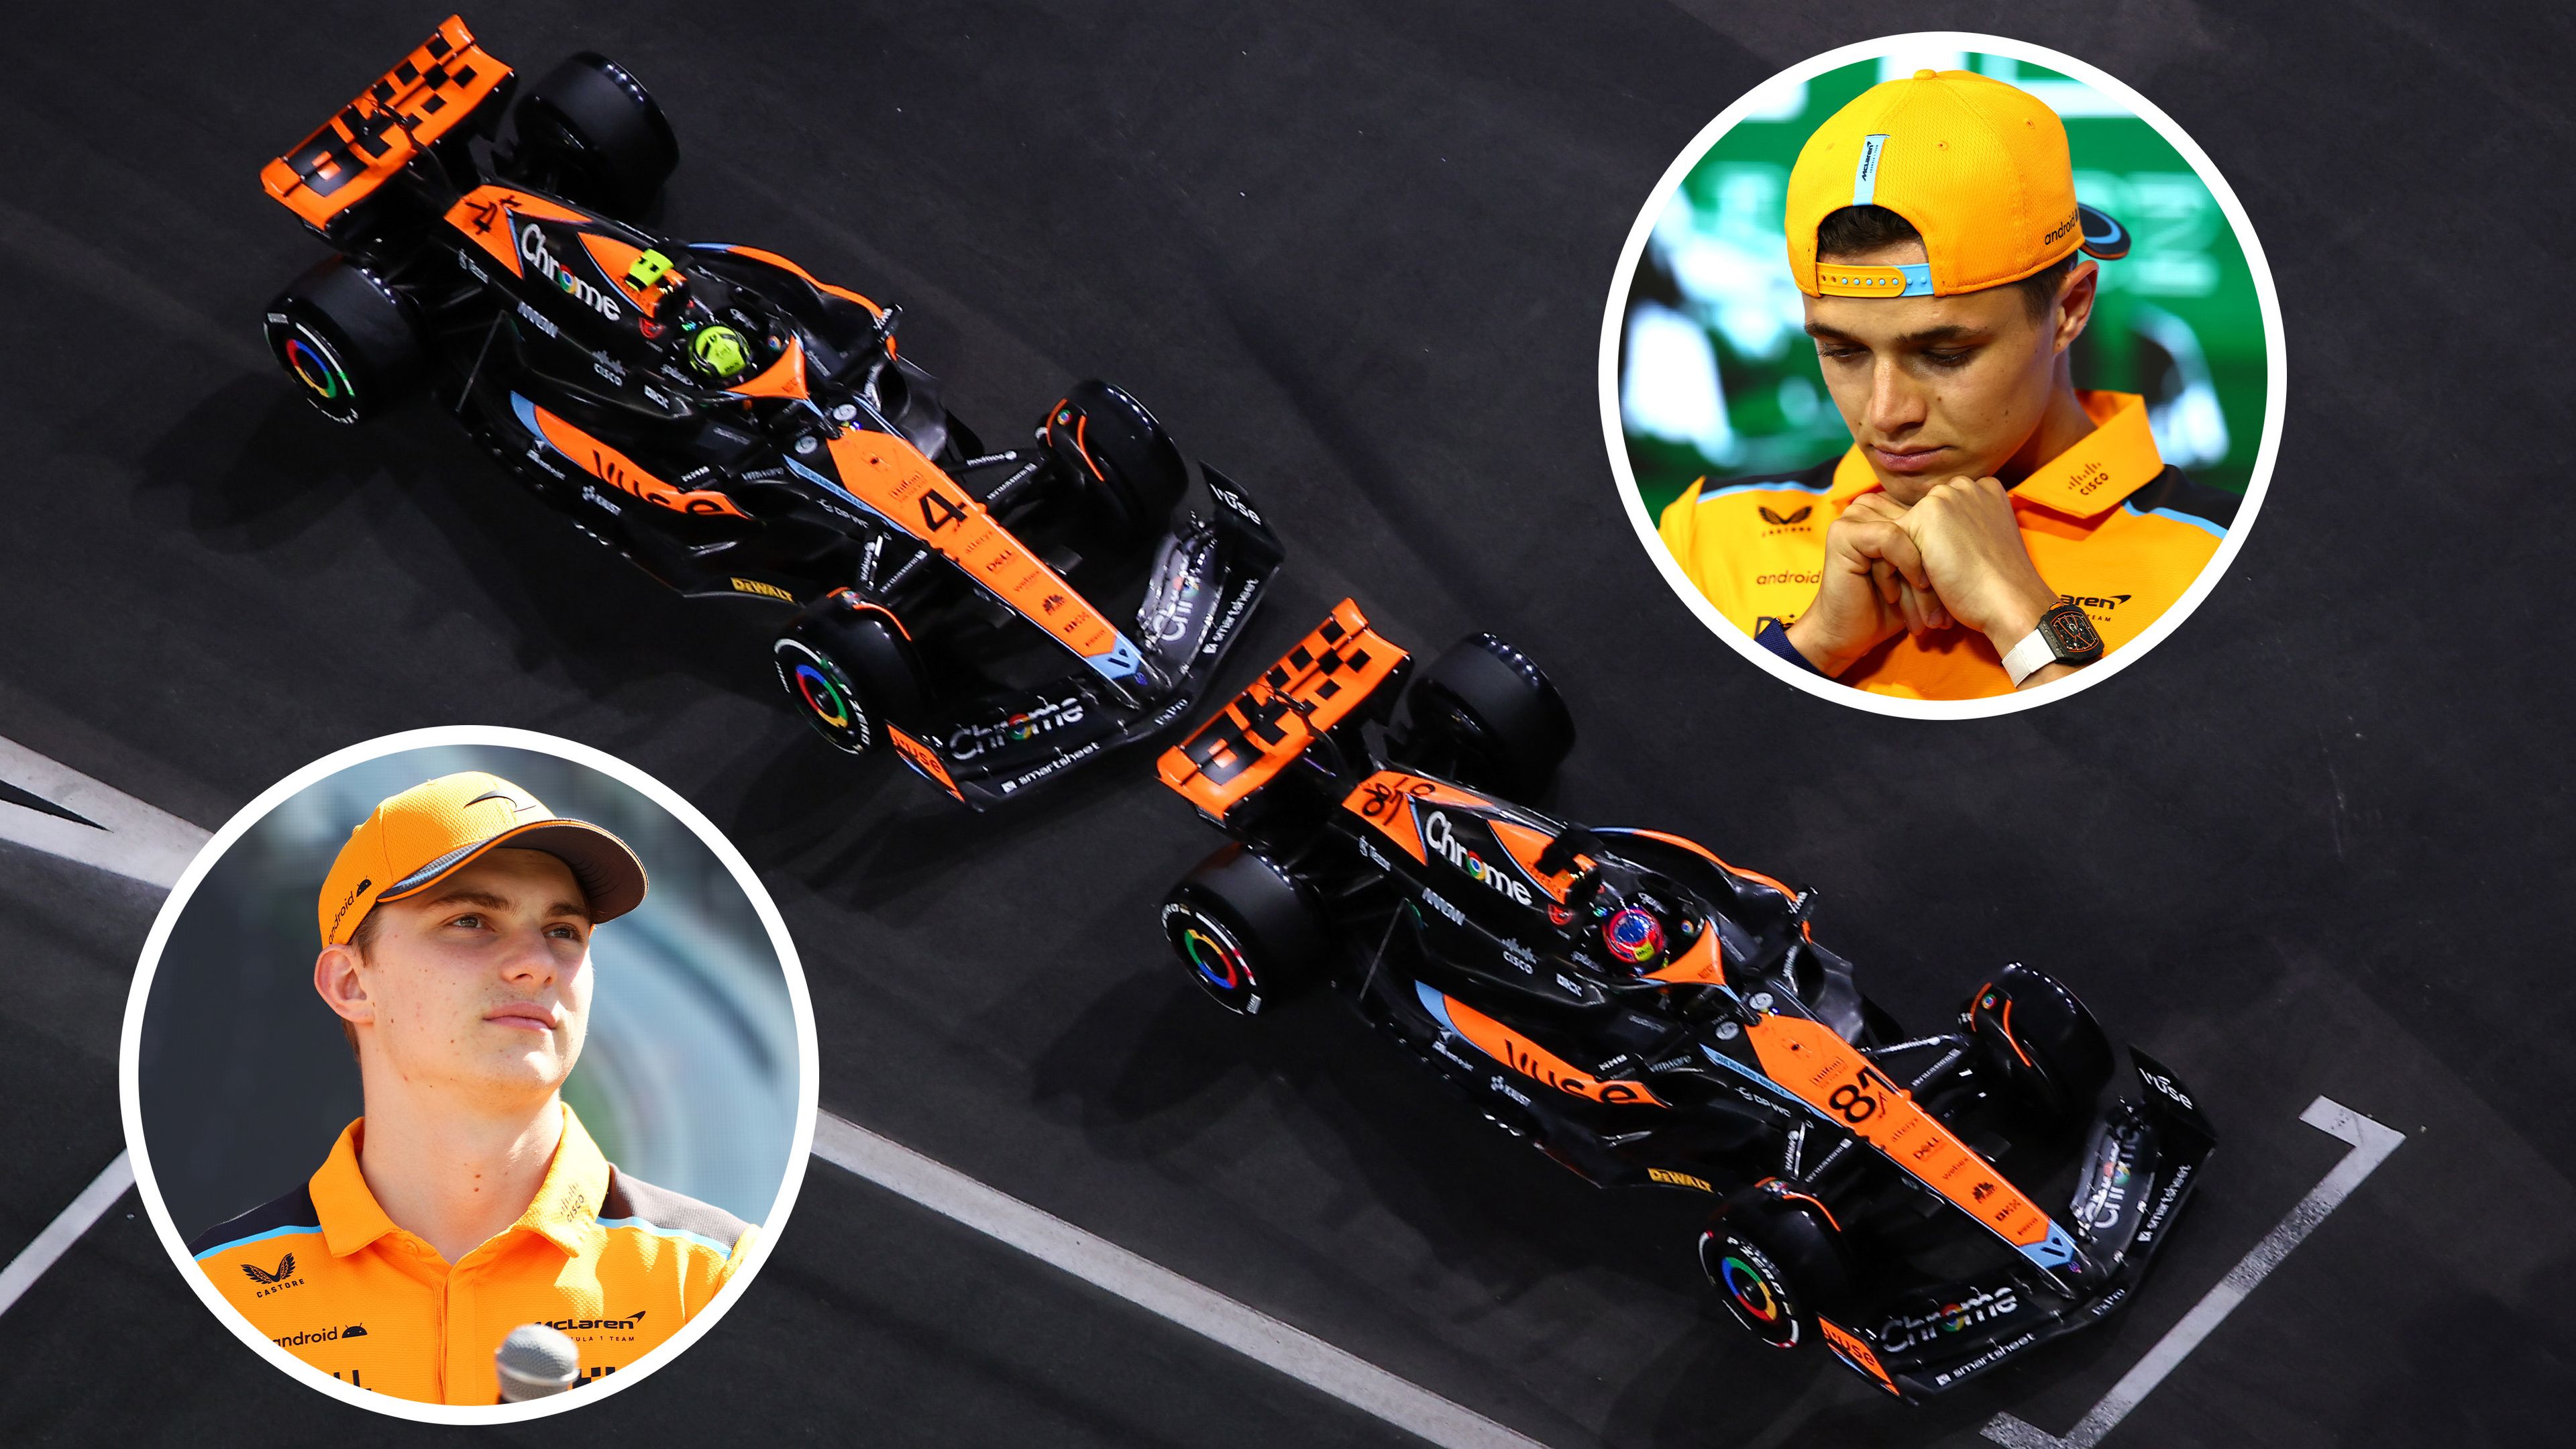 Lando Norris gives salty post-race interview after team order to let Oscar Piastri past